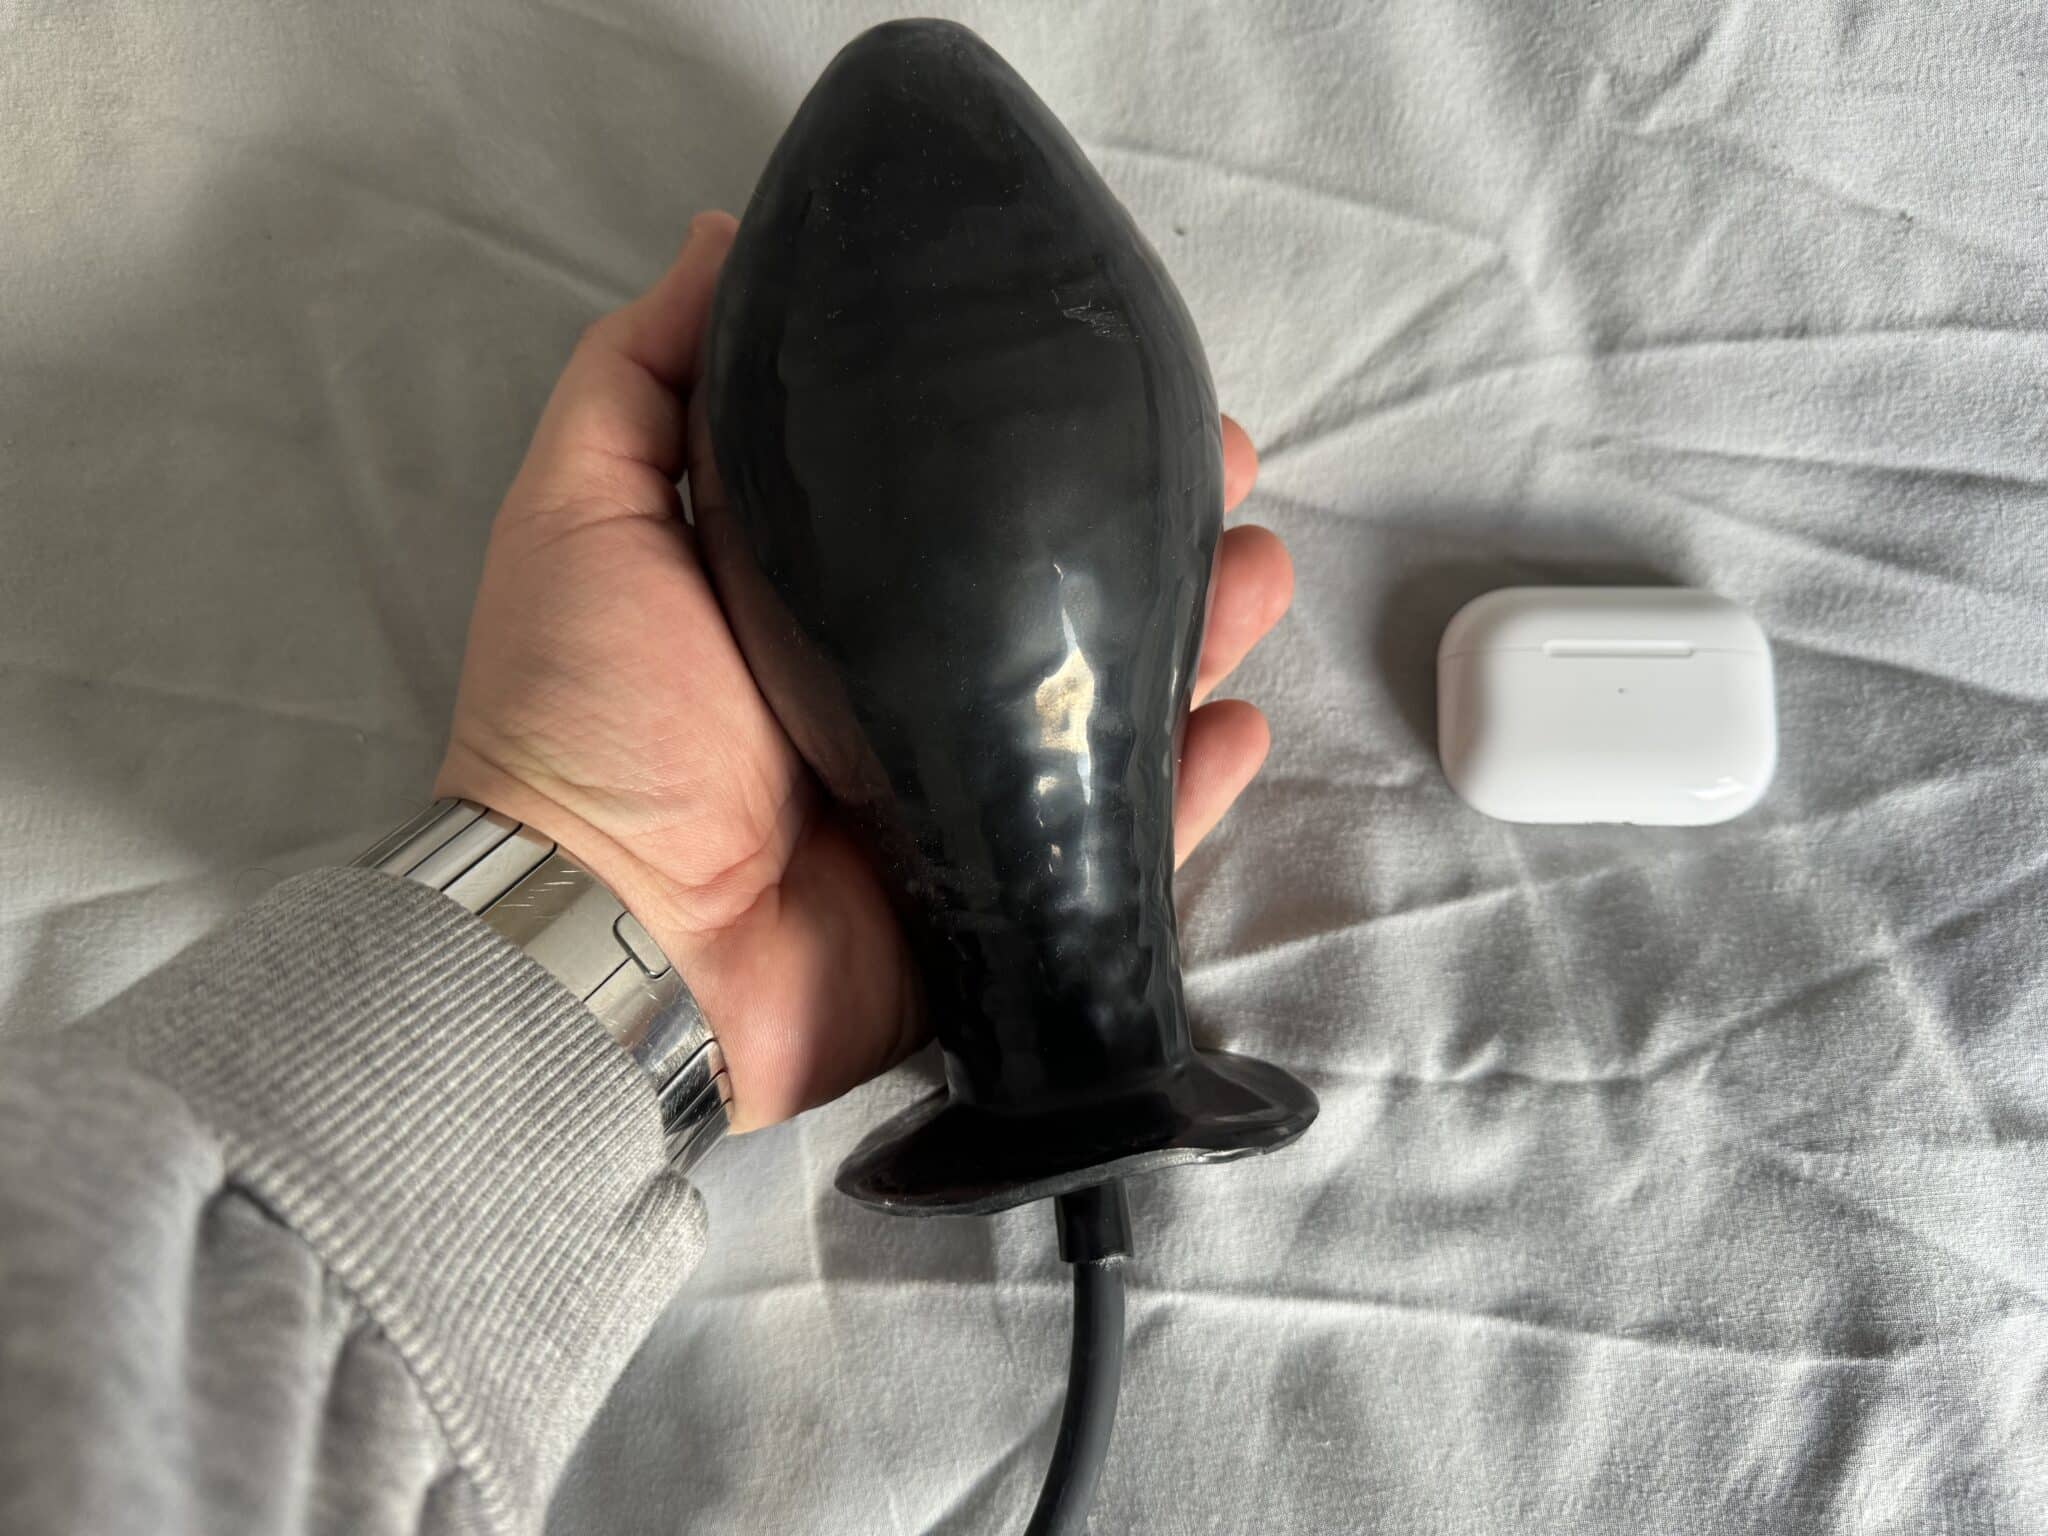 Cock Locker Inflatable Penis Butt Plug 6 Inch Ease of use